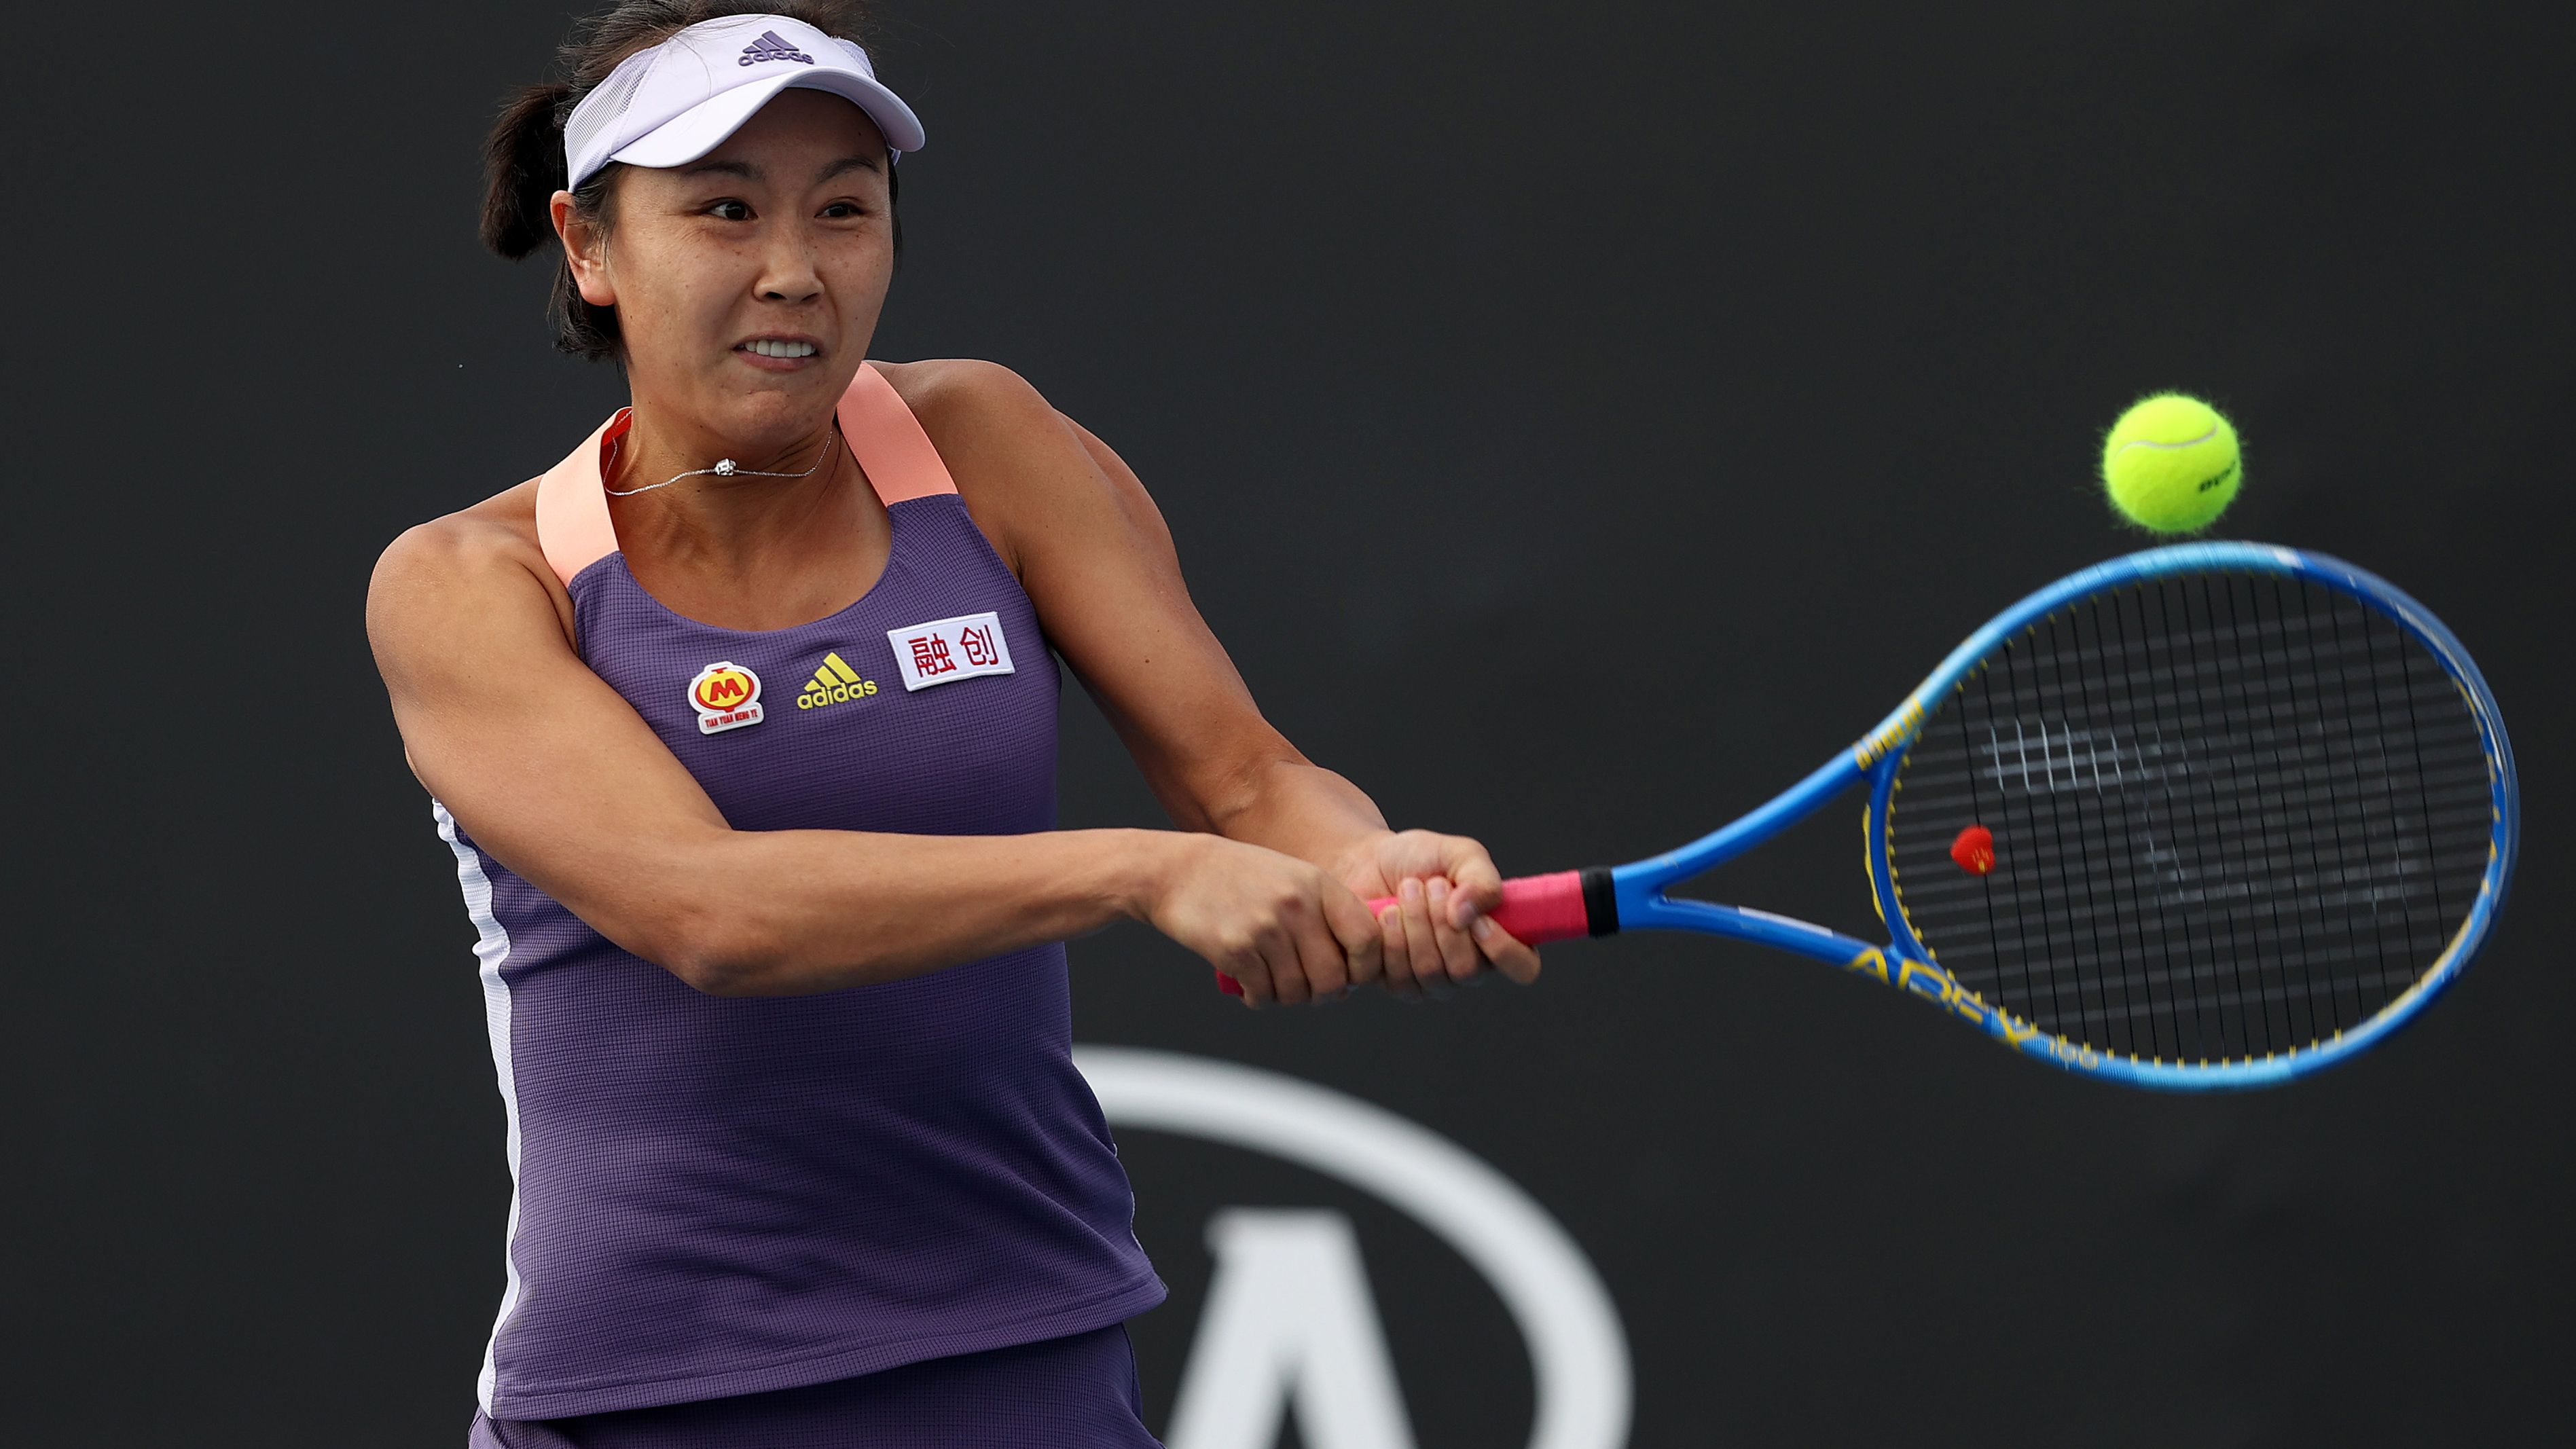 WTA Tour threatens to boycott China in wake of Peng Shuai sexual assault allegations